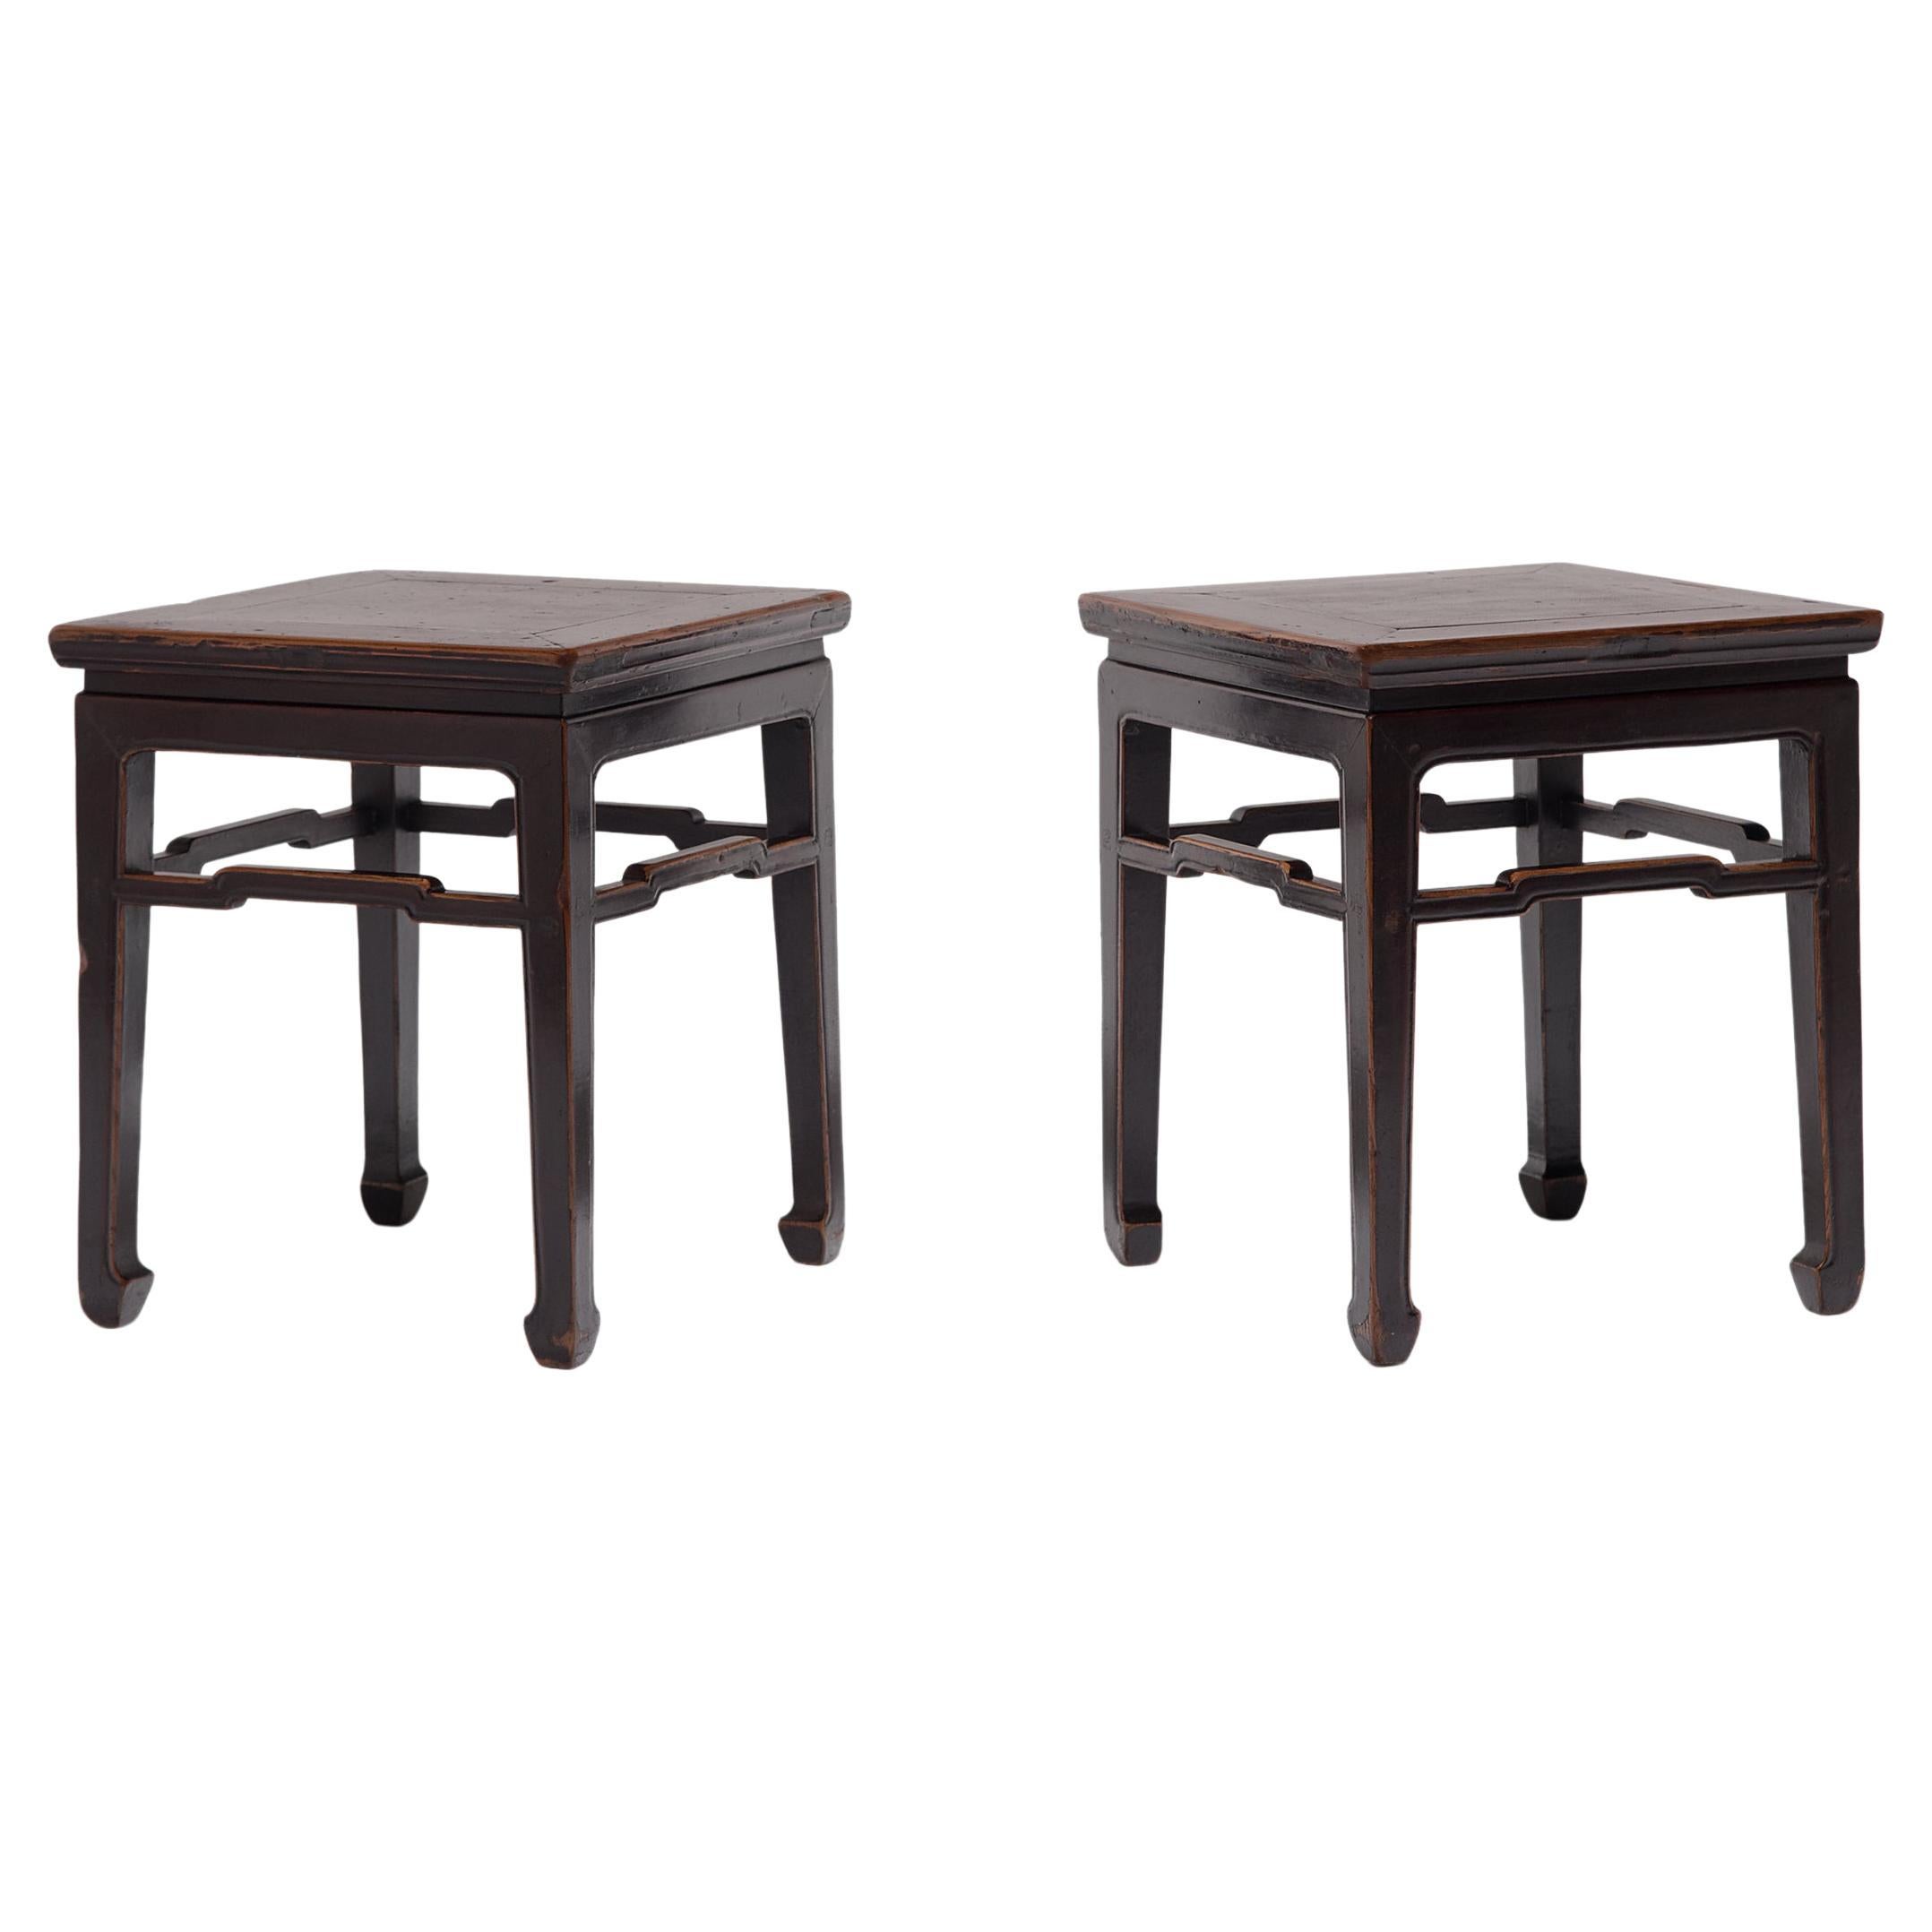 Pair of Chinese Square Stools with Humpback Stretchers, c. 1850